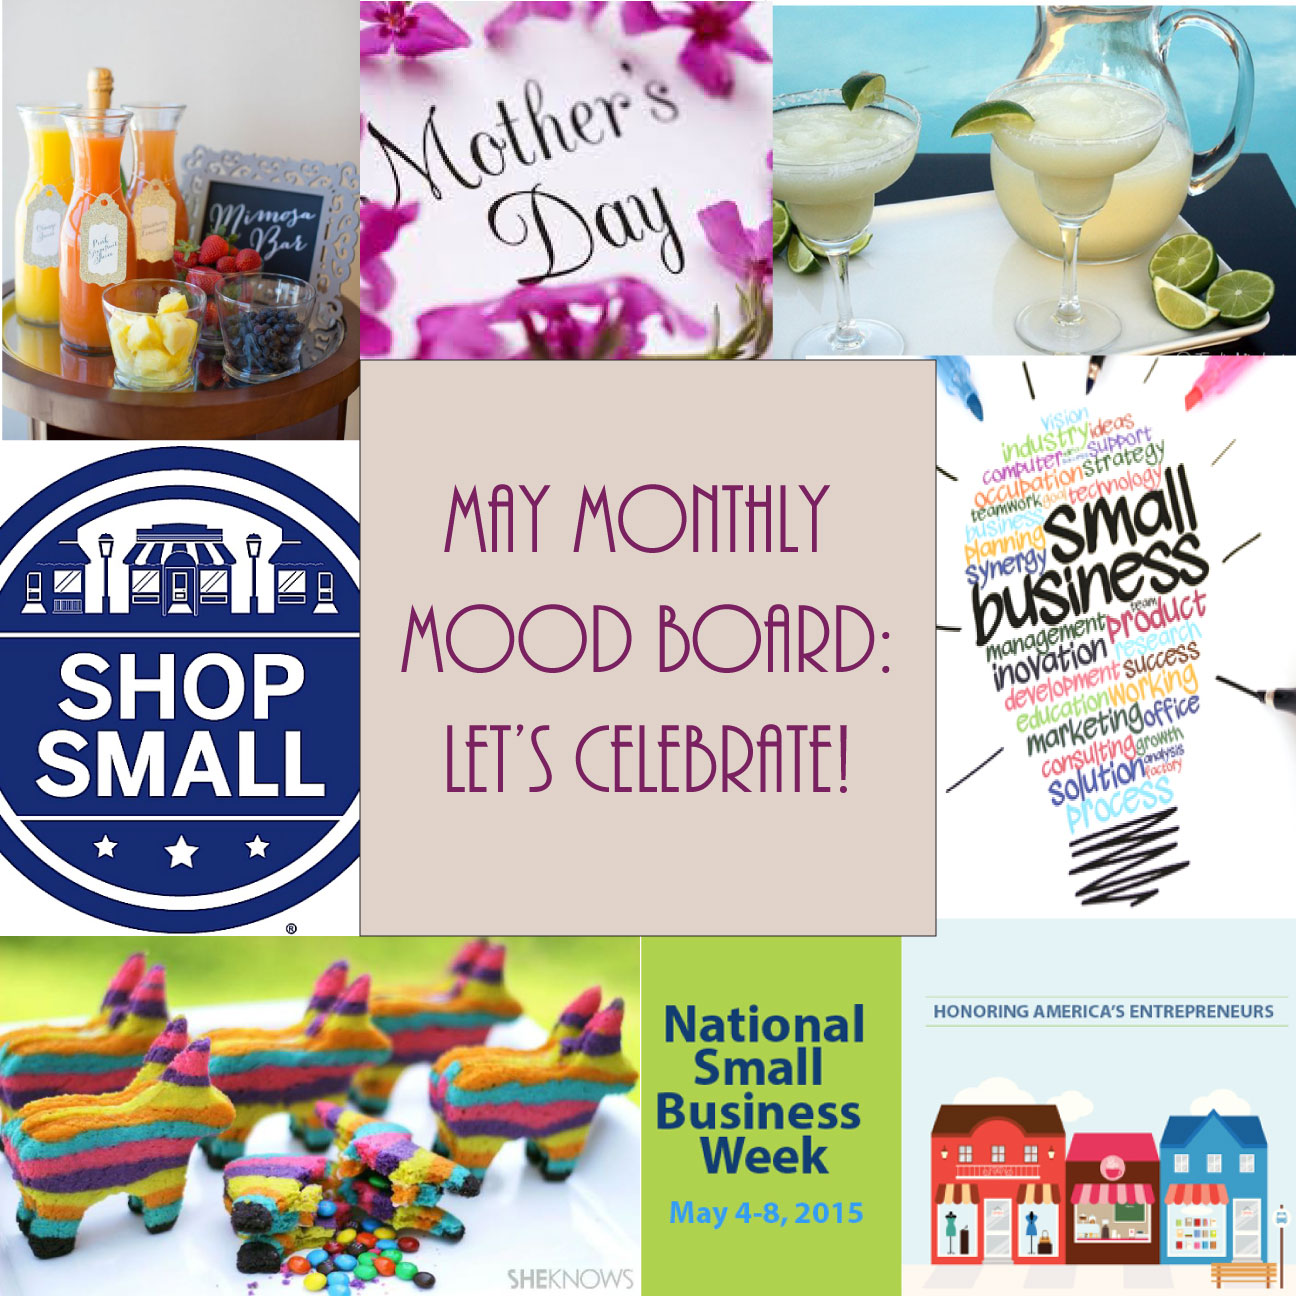 Let's Celebrate! - May Monthly Mood Board - F.I.N.D.S. Blog